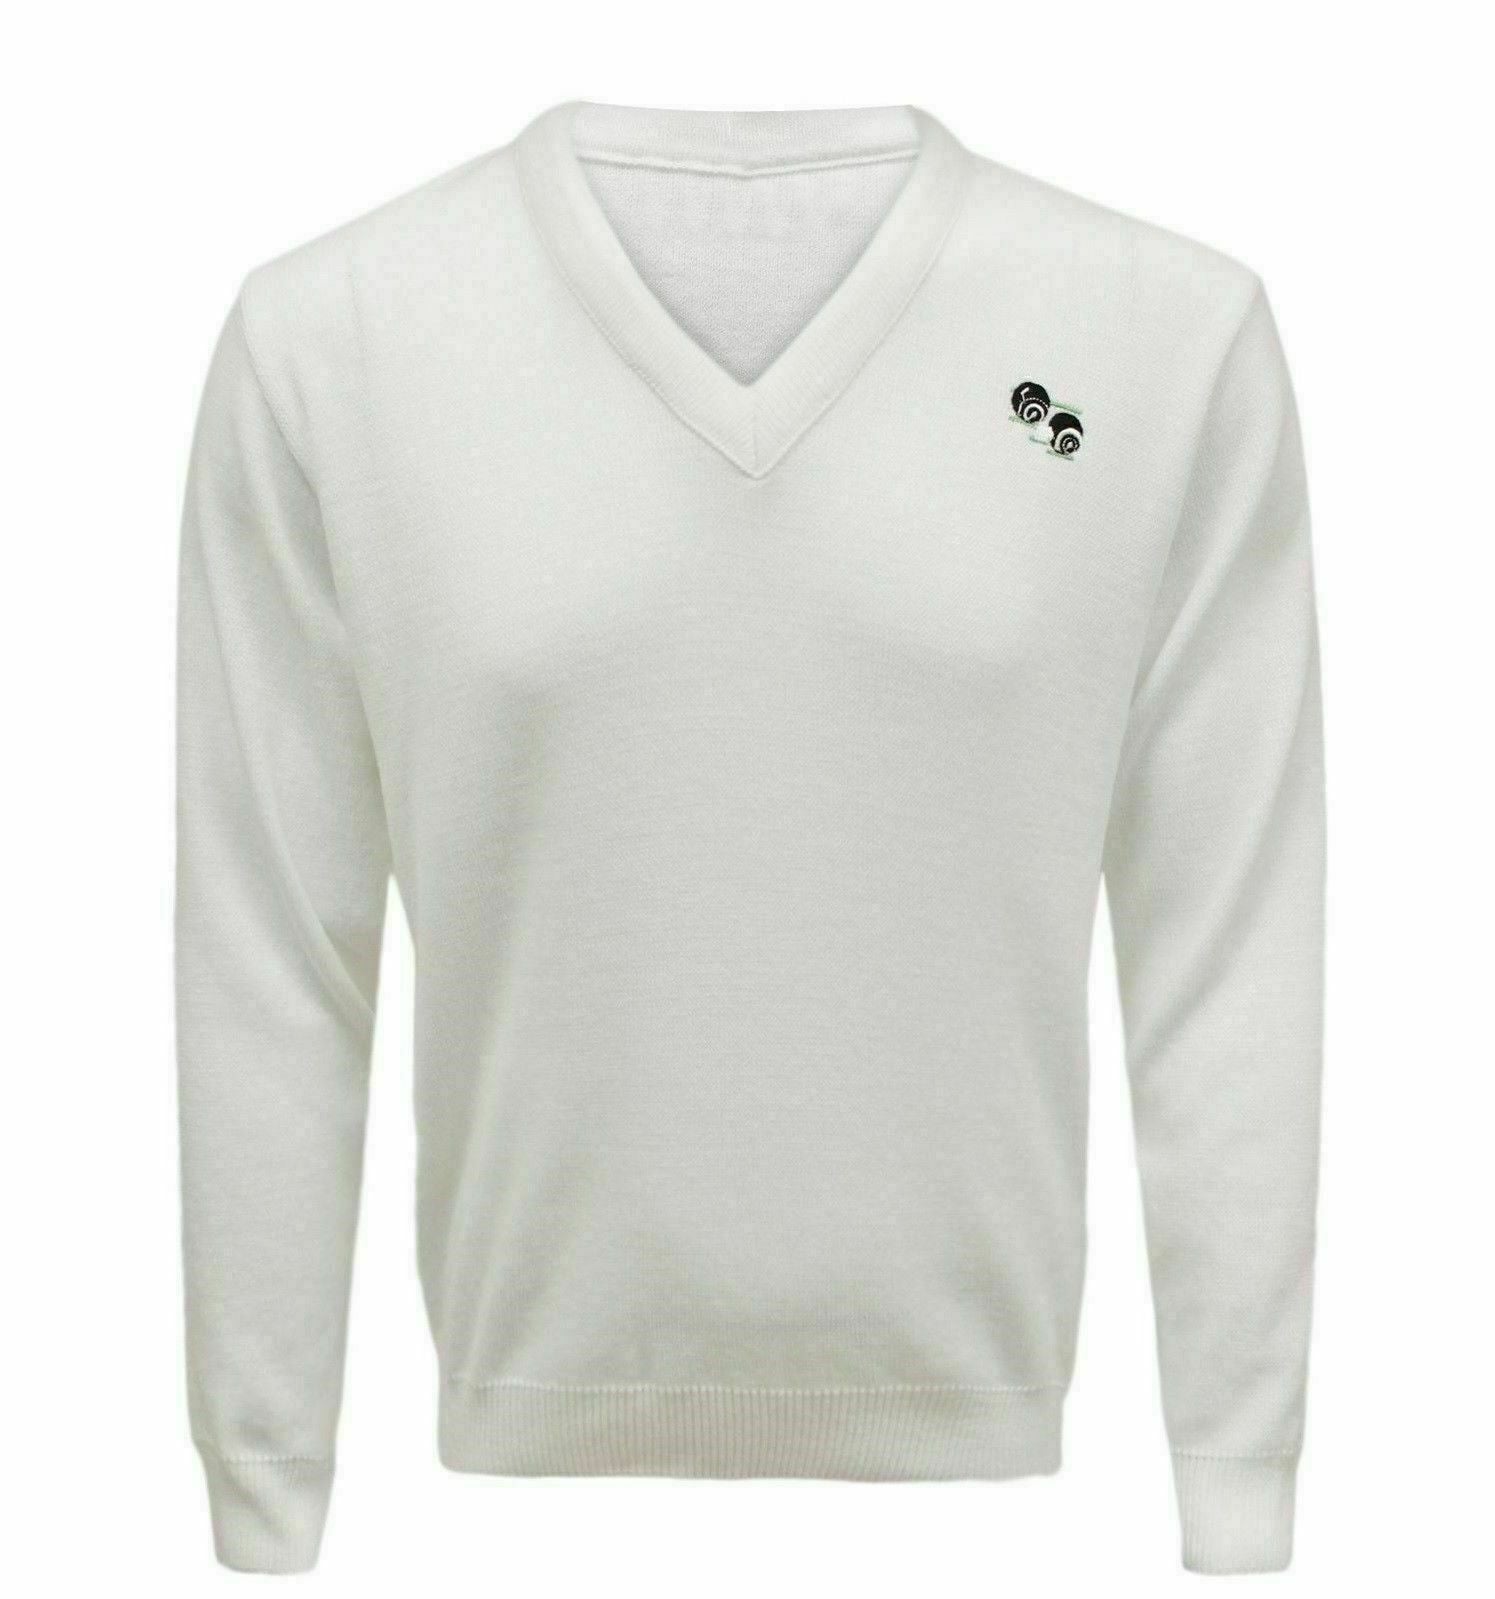 MEN'S WARM SWEATER TOPS JERSY BOWLING V-NECK KNITTED WHITE JUMPER WITH LOGO